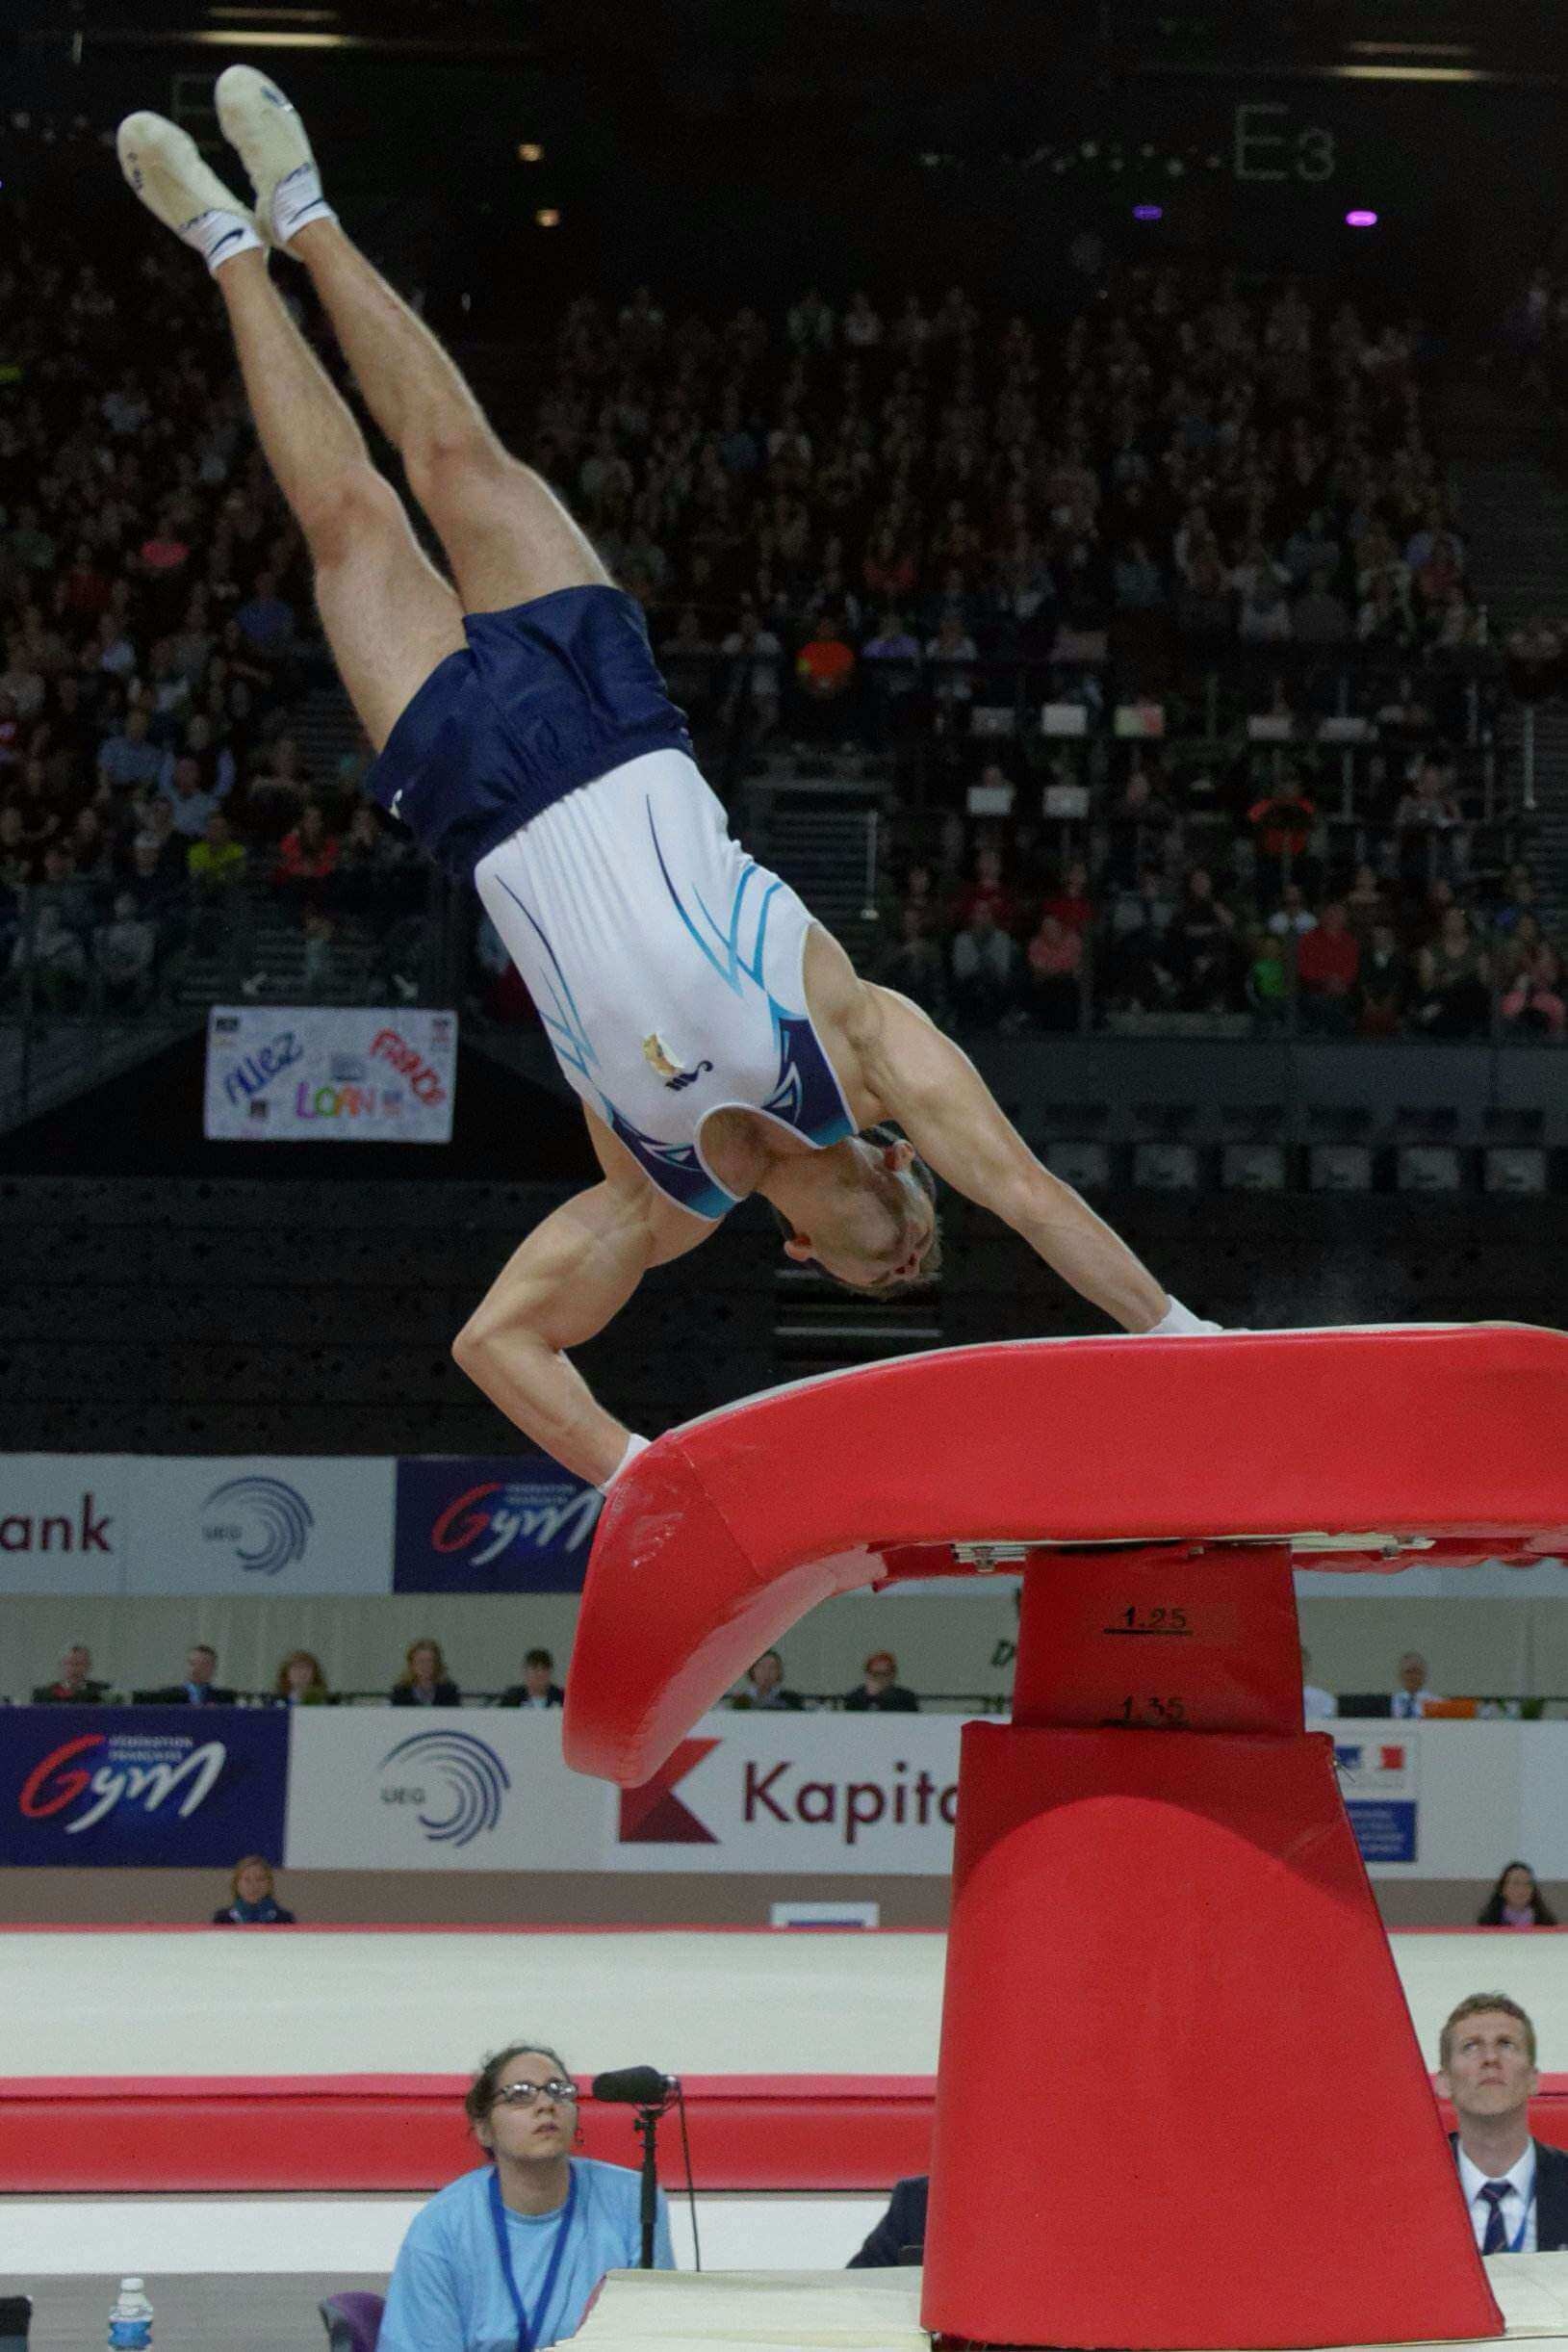 Vault (Gymnastics): A male gymnast performs artistic choreography in the air during an event. 1630x2450 HD Wallpaper.